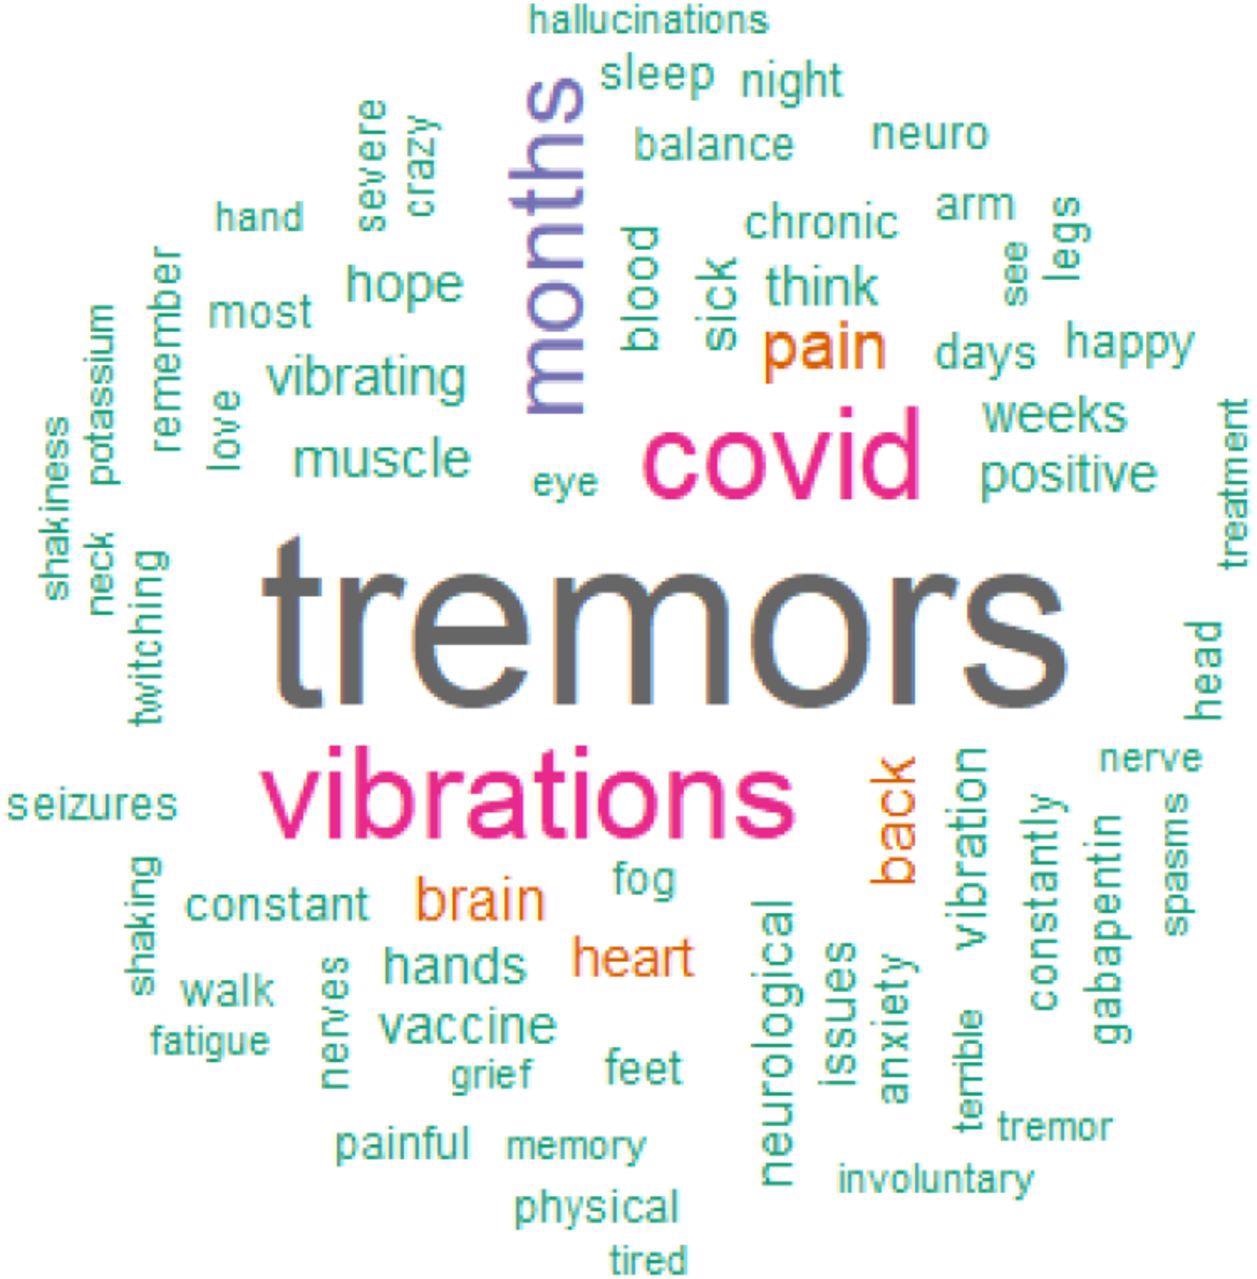 Word Cloud generated from Survivor Corps Facebook comments in response to post requesting information on tremor and internal vibrations